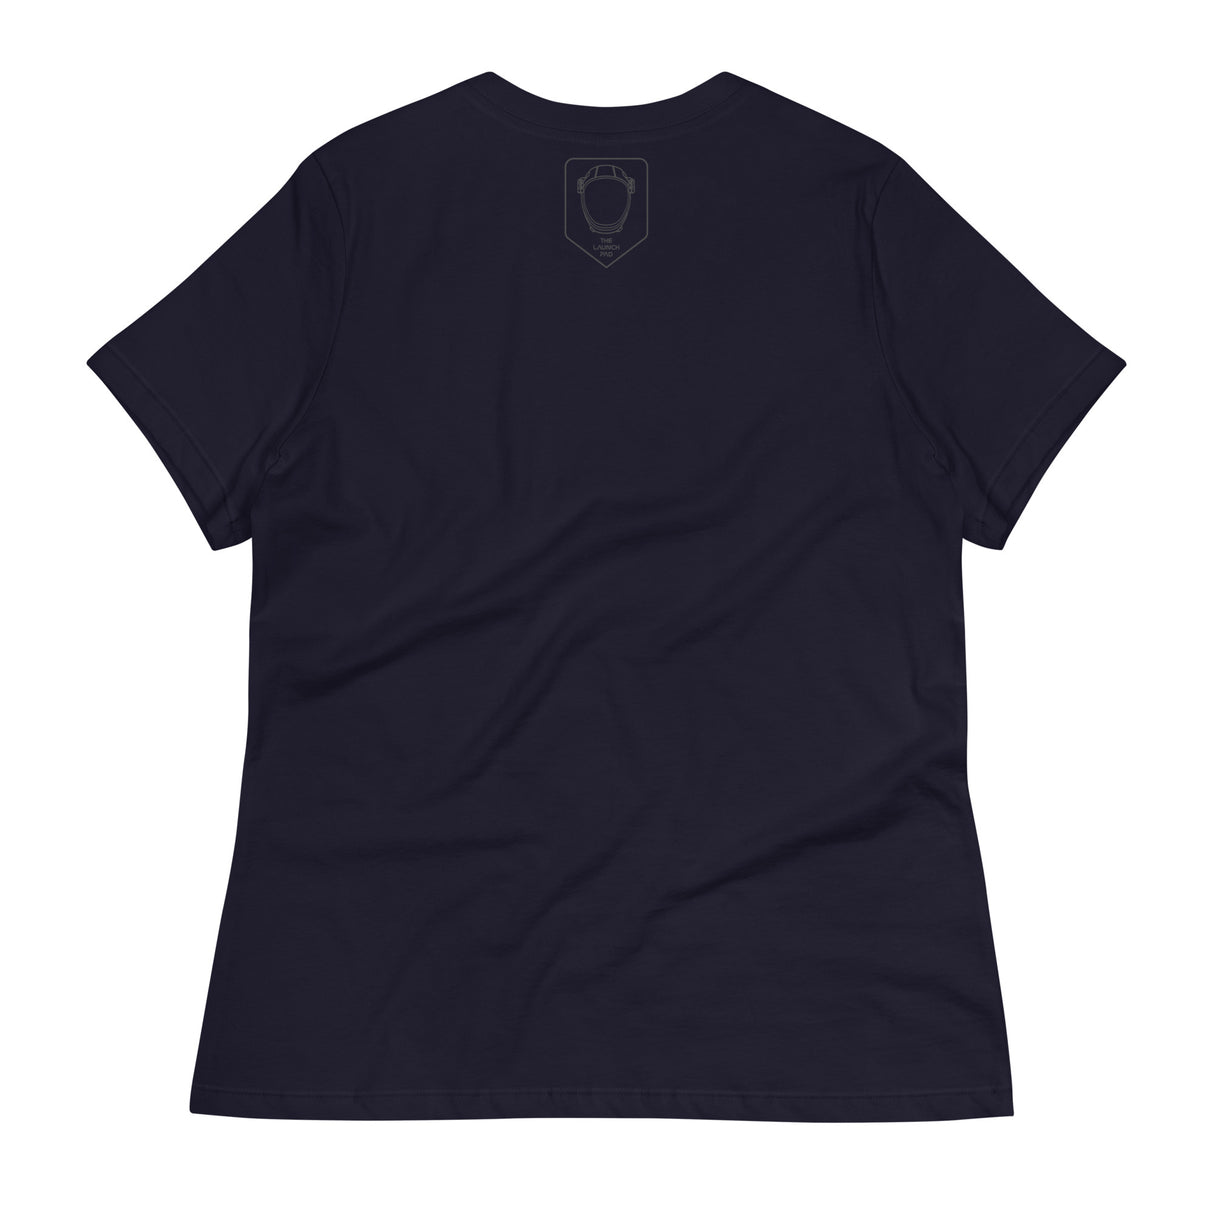 LIMITED! Starship IFT-3 Mission Women's Tee